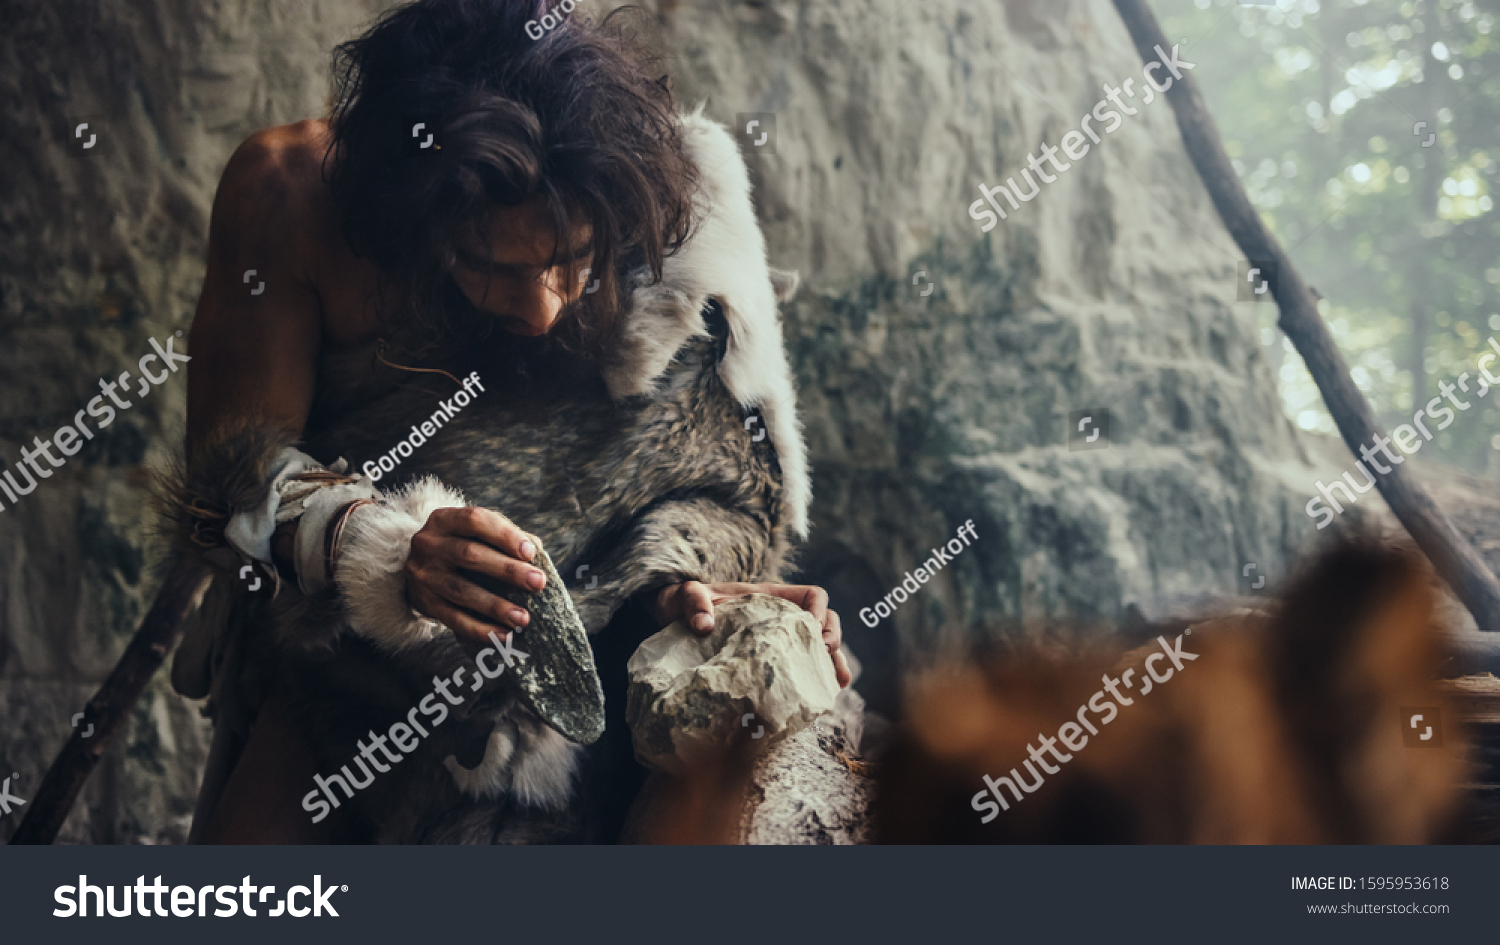 Close-up Shot of a Primeval Caveman Wearing Animal Skin Hits Rock with Sharp Stone, Makes First Primitive Tool for Hunting Animal Prey. Neanderthal Using Flint Rock. Dawn of Human Civilization. #1595953618